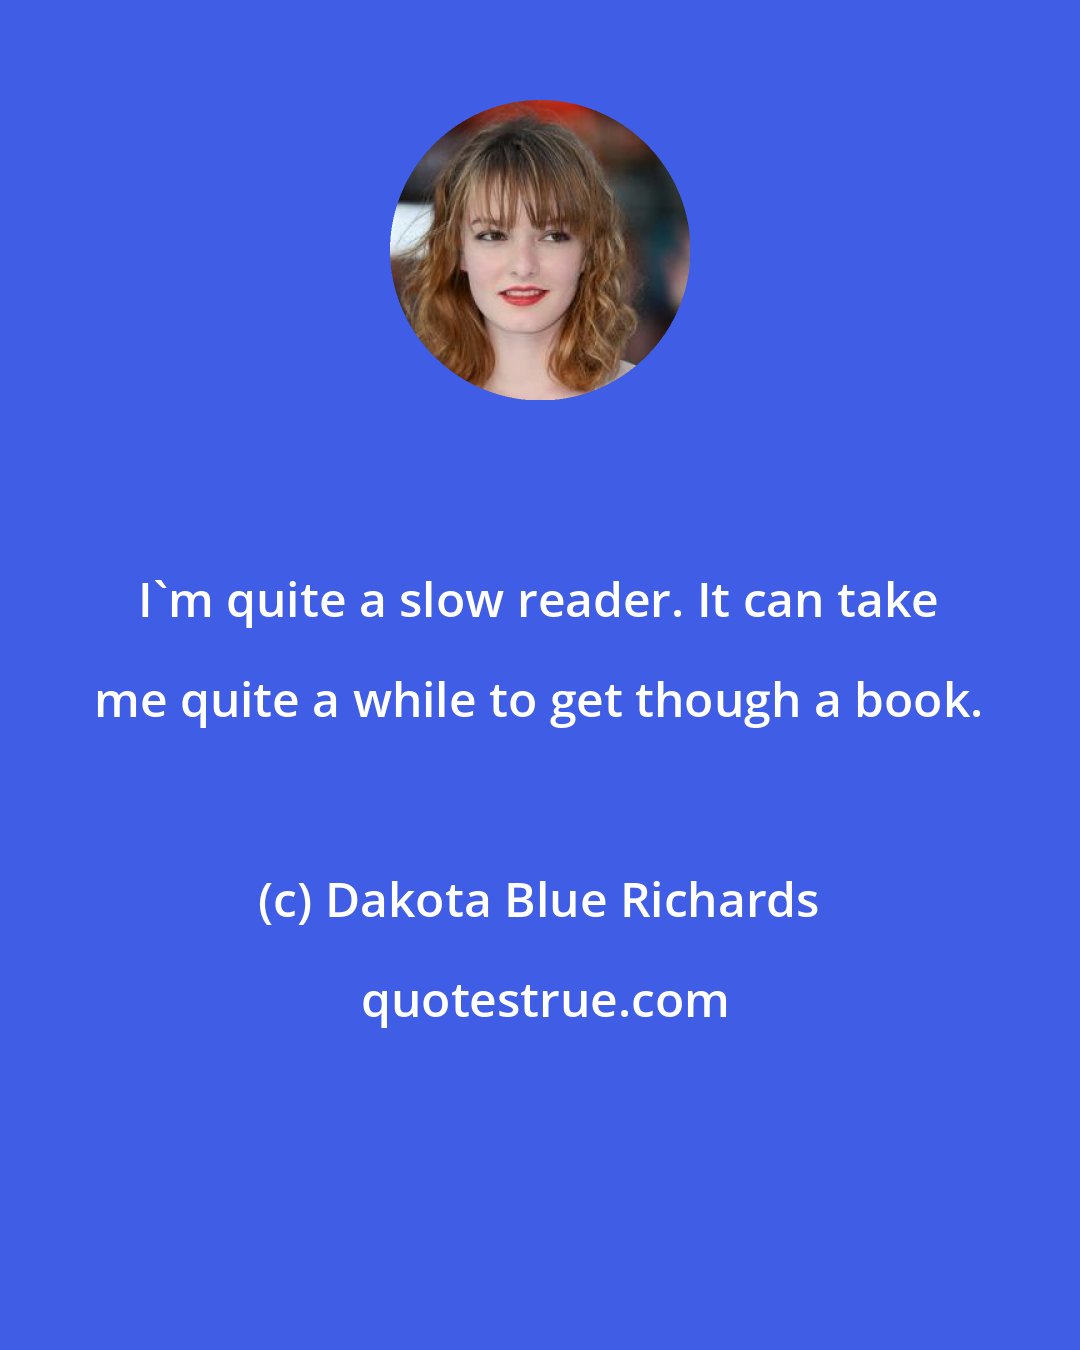 Dakota Blue Richards: I'm quite a slow reader. It can take me quite a while to get though a book.